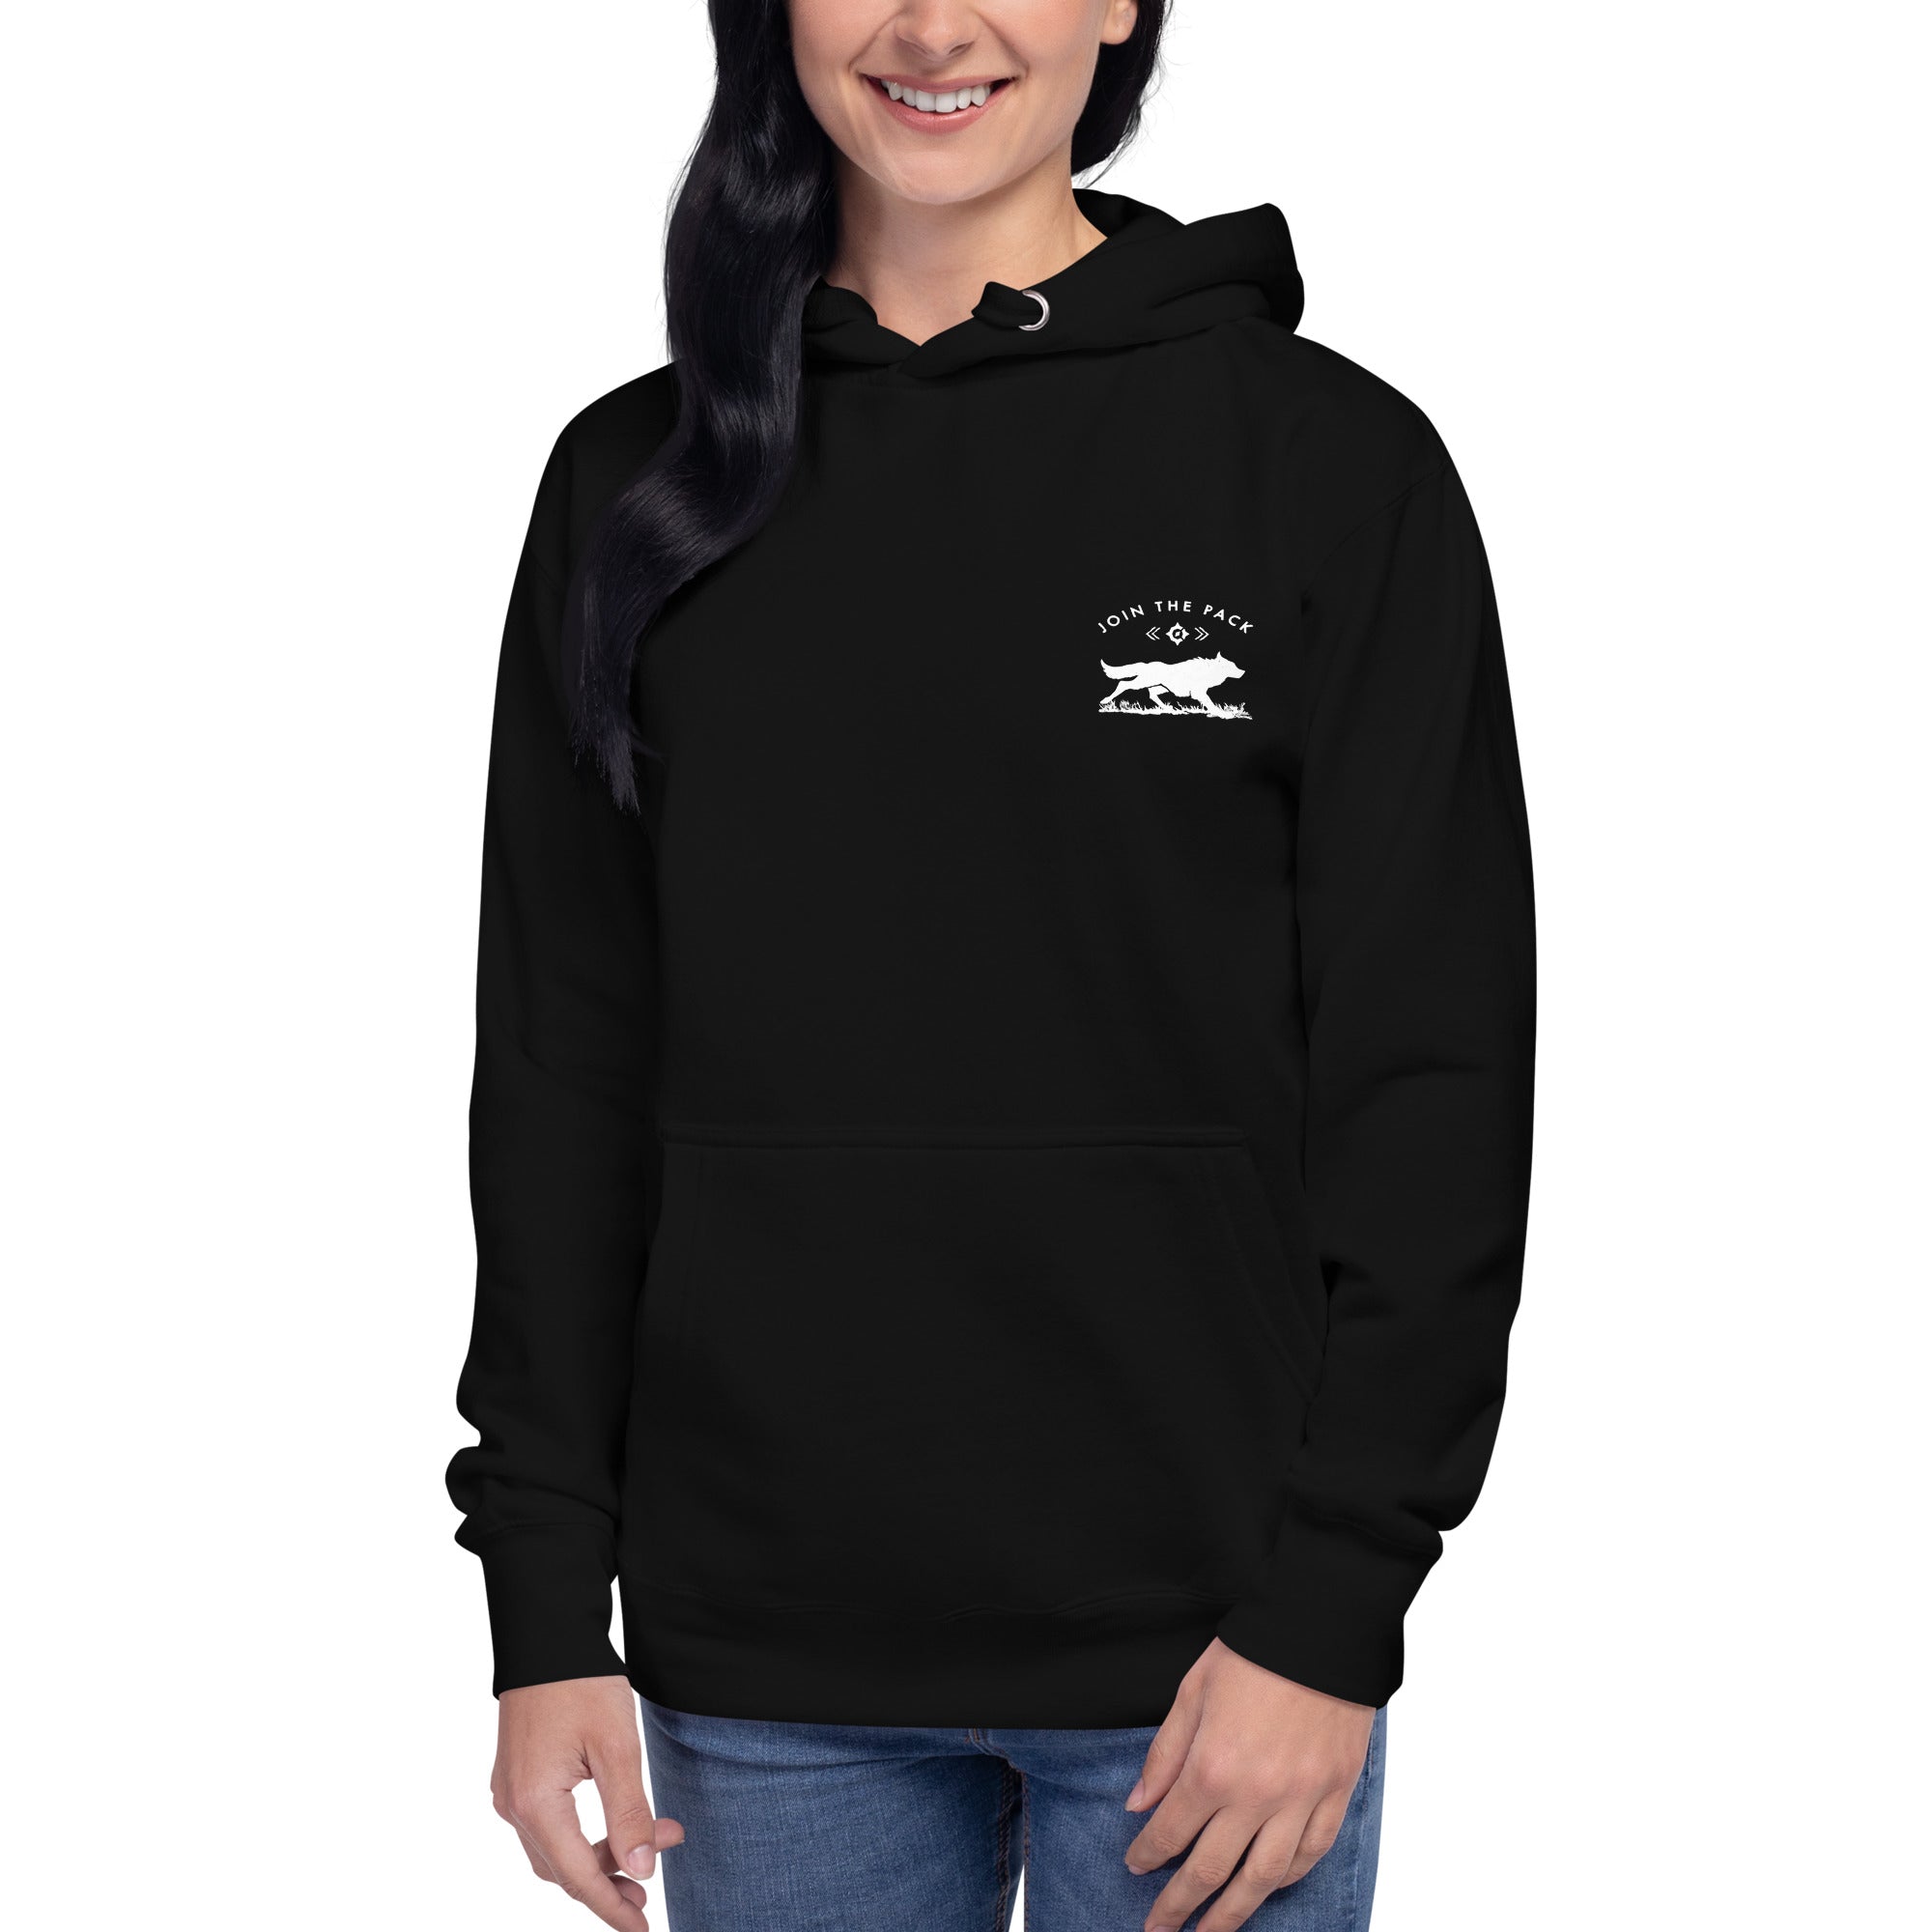 Join The Pack Hoodie